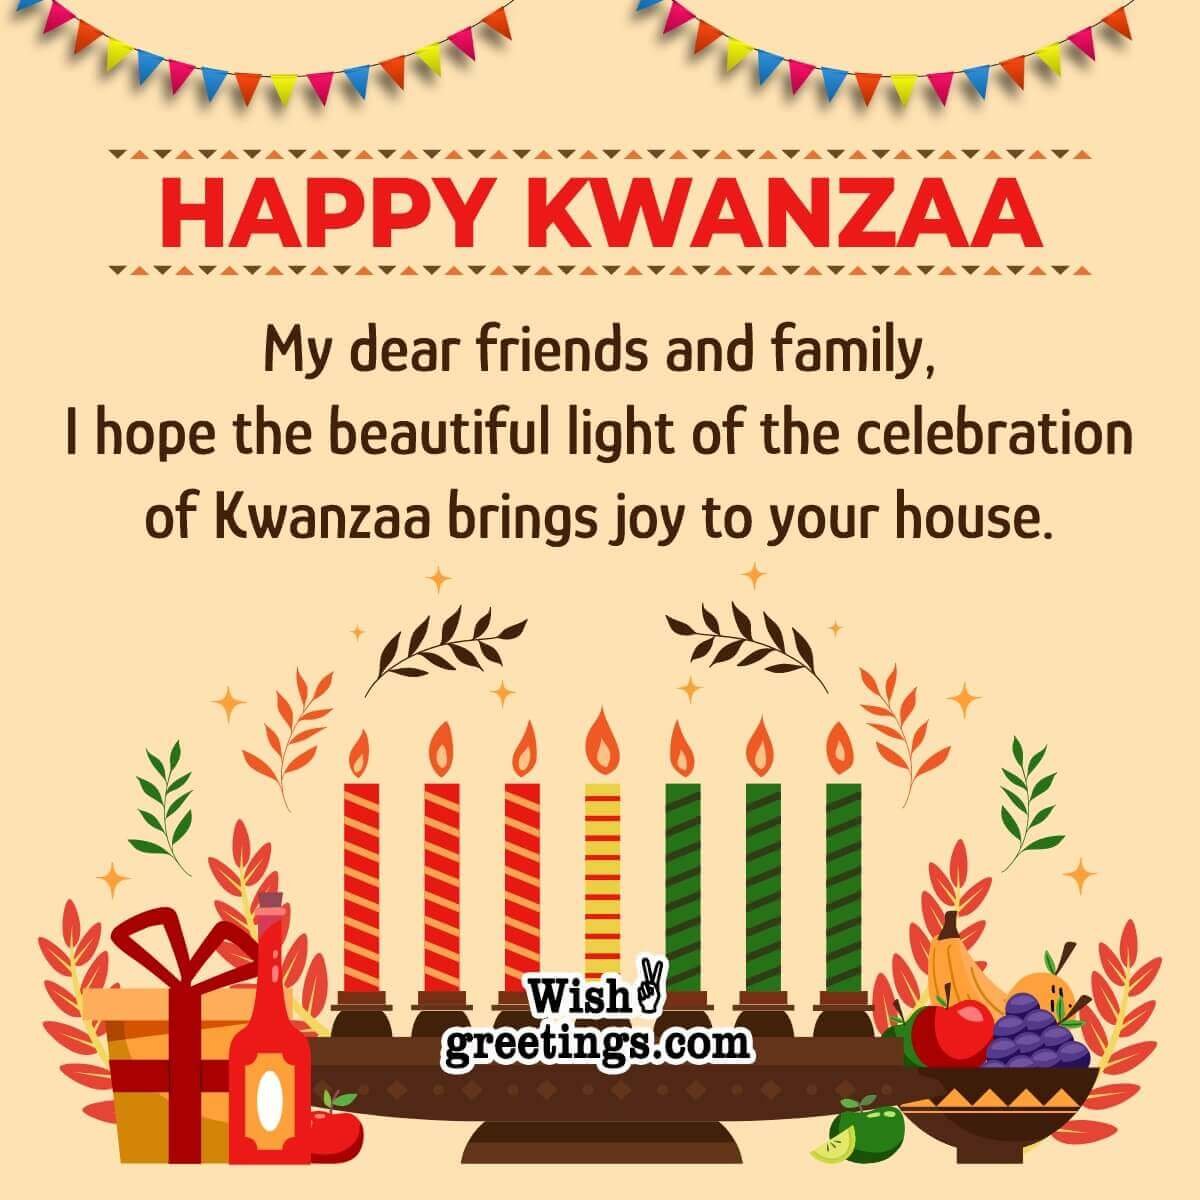 Happy Kwanzaa Message Photo For Friends And Family